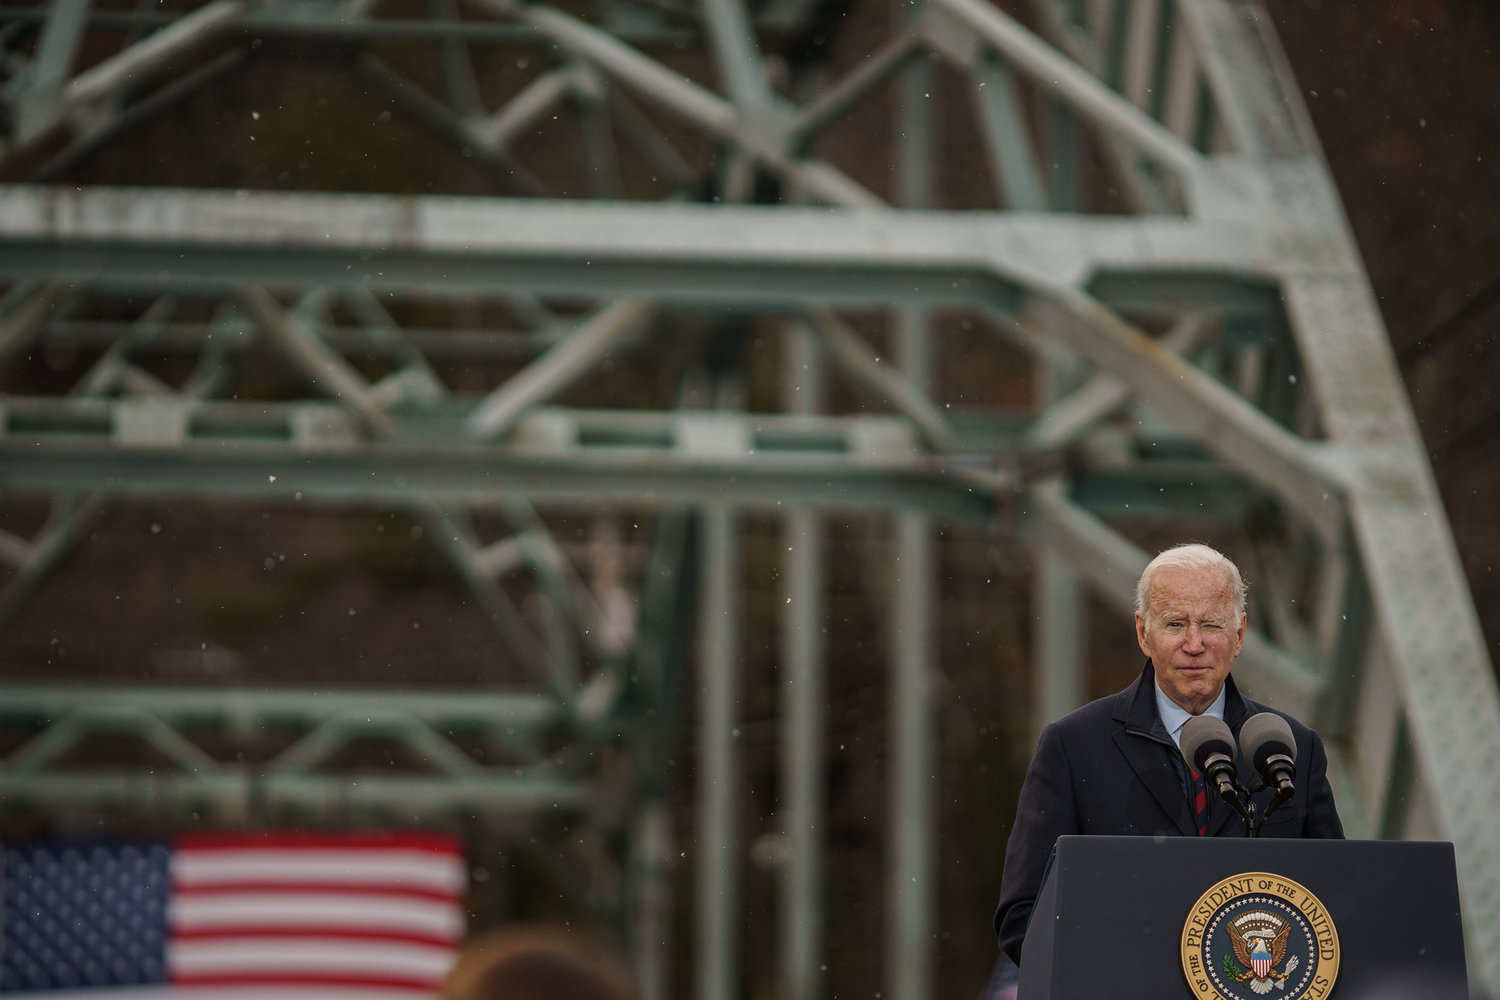 President Joe Biden delivers a speech on infrastructure while visiting the NH 175 bridge spanning the Pemigewasset River on Tuesday, Nov. 16, 2021, in Woodstock, New Hampshire. (John Tully/Getty Images/TNS)